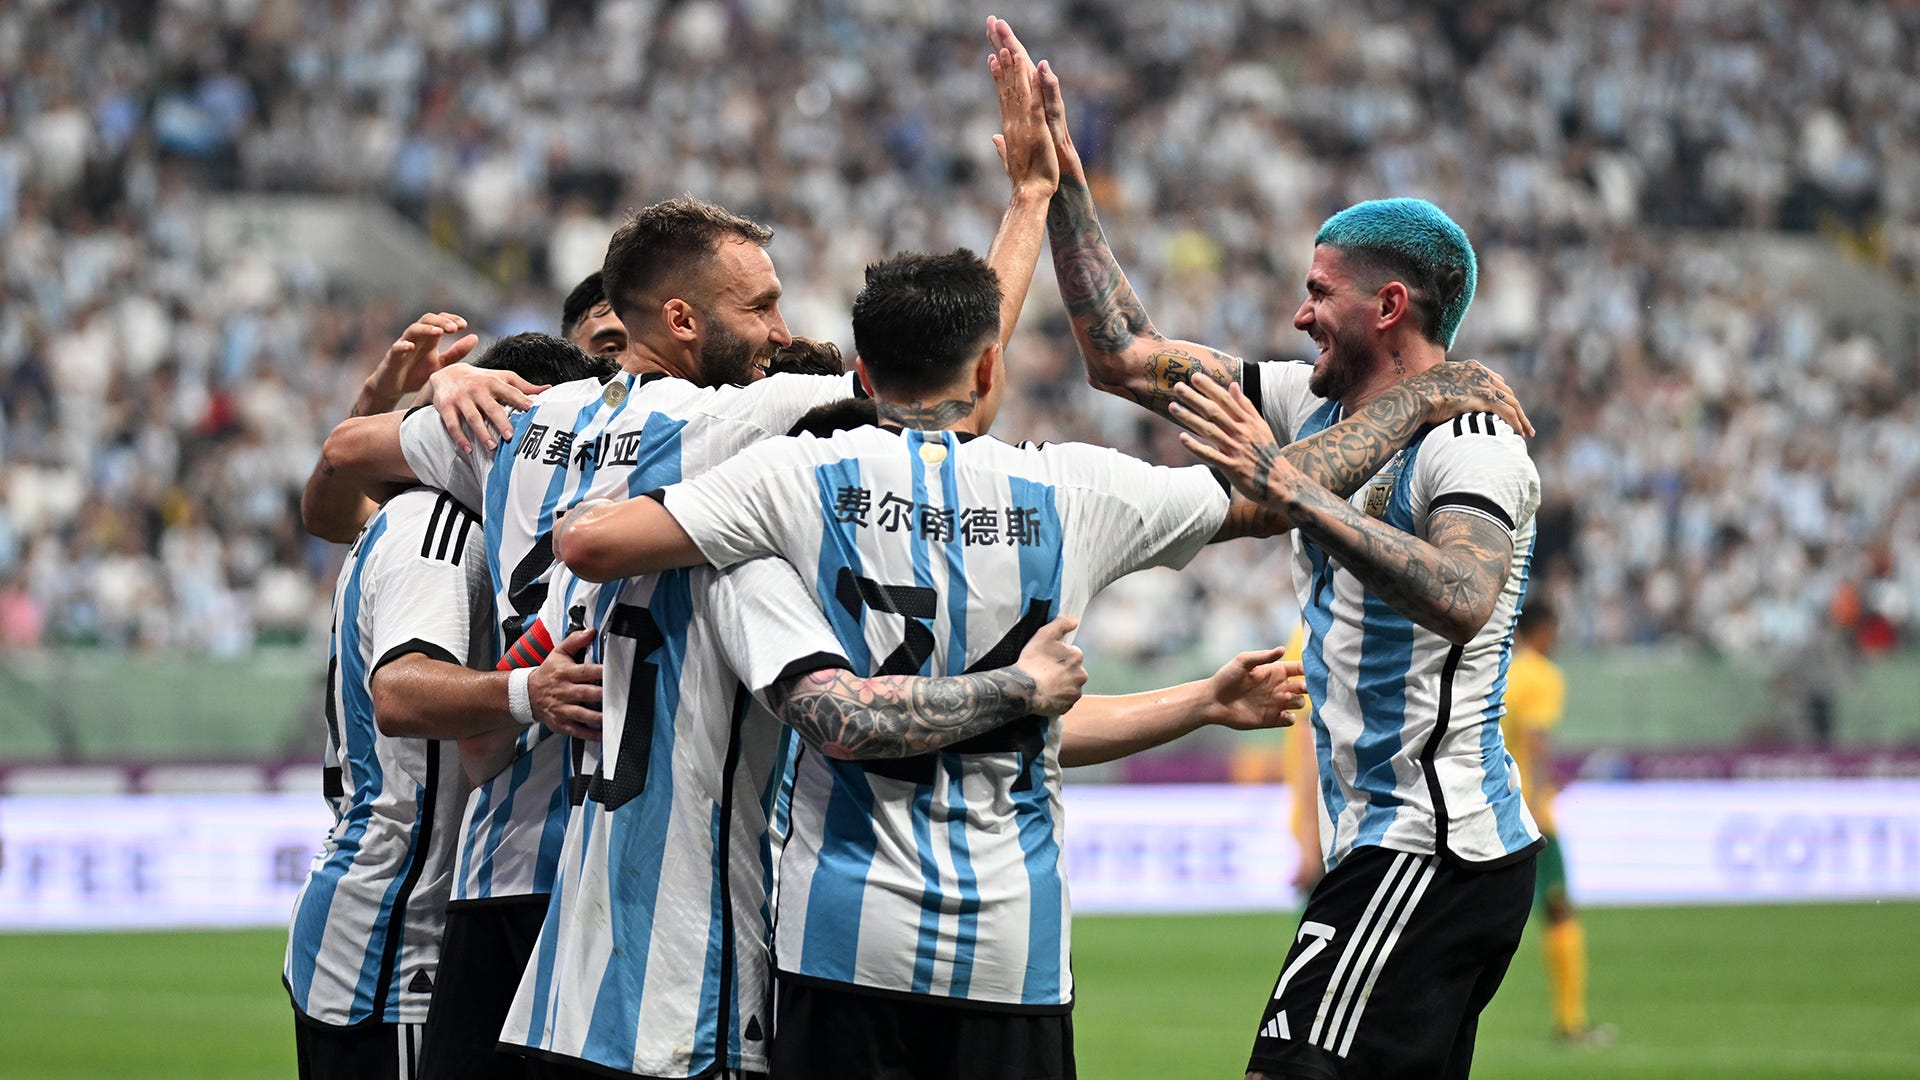 argentina today match live streaming